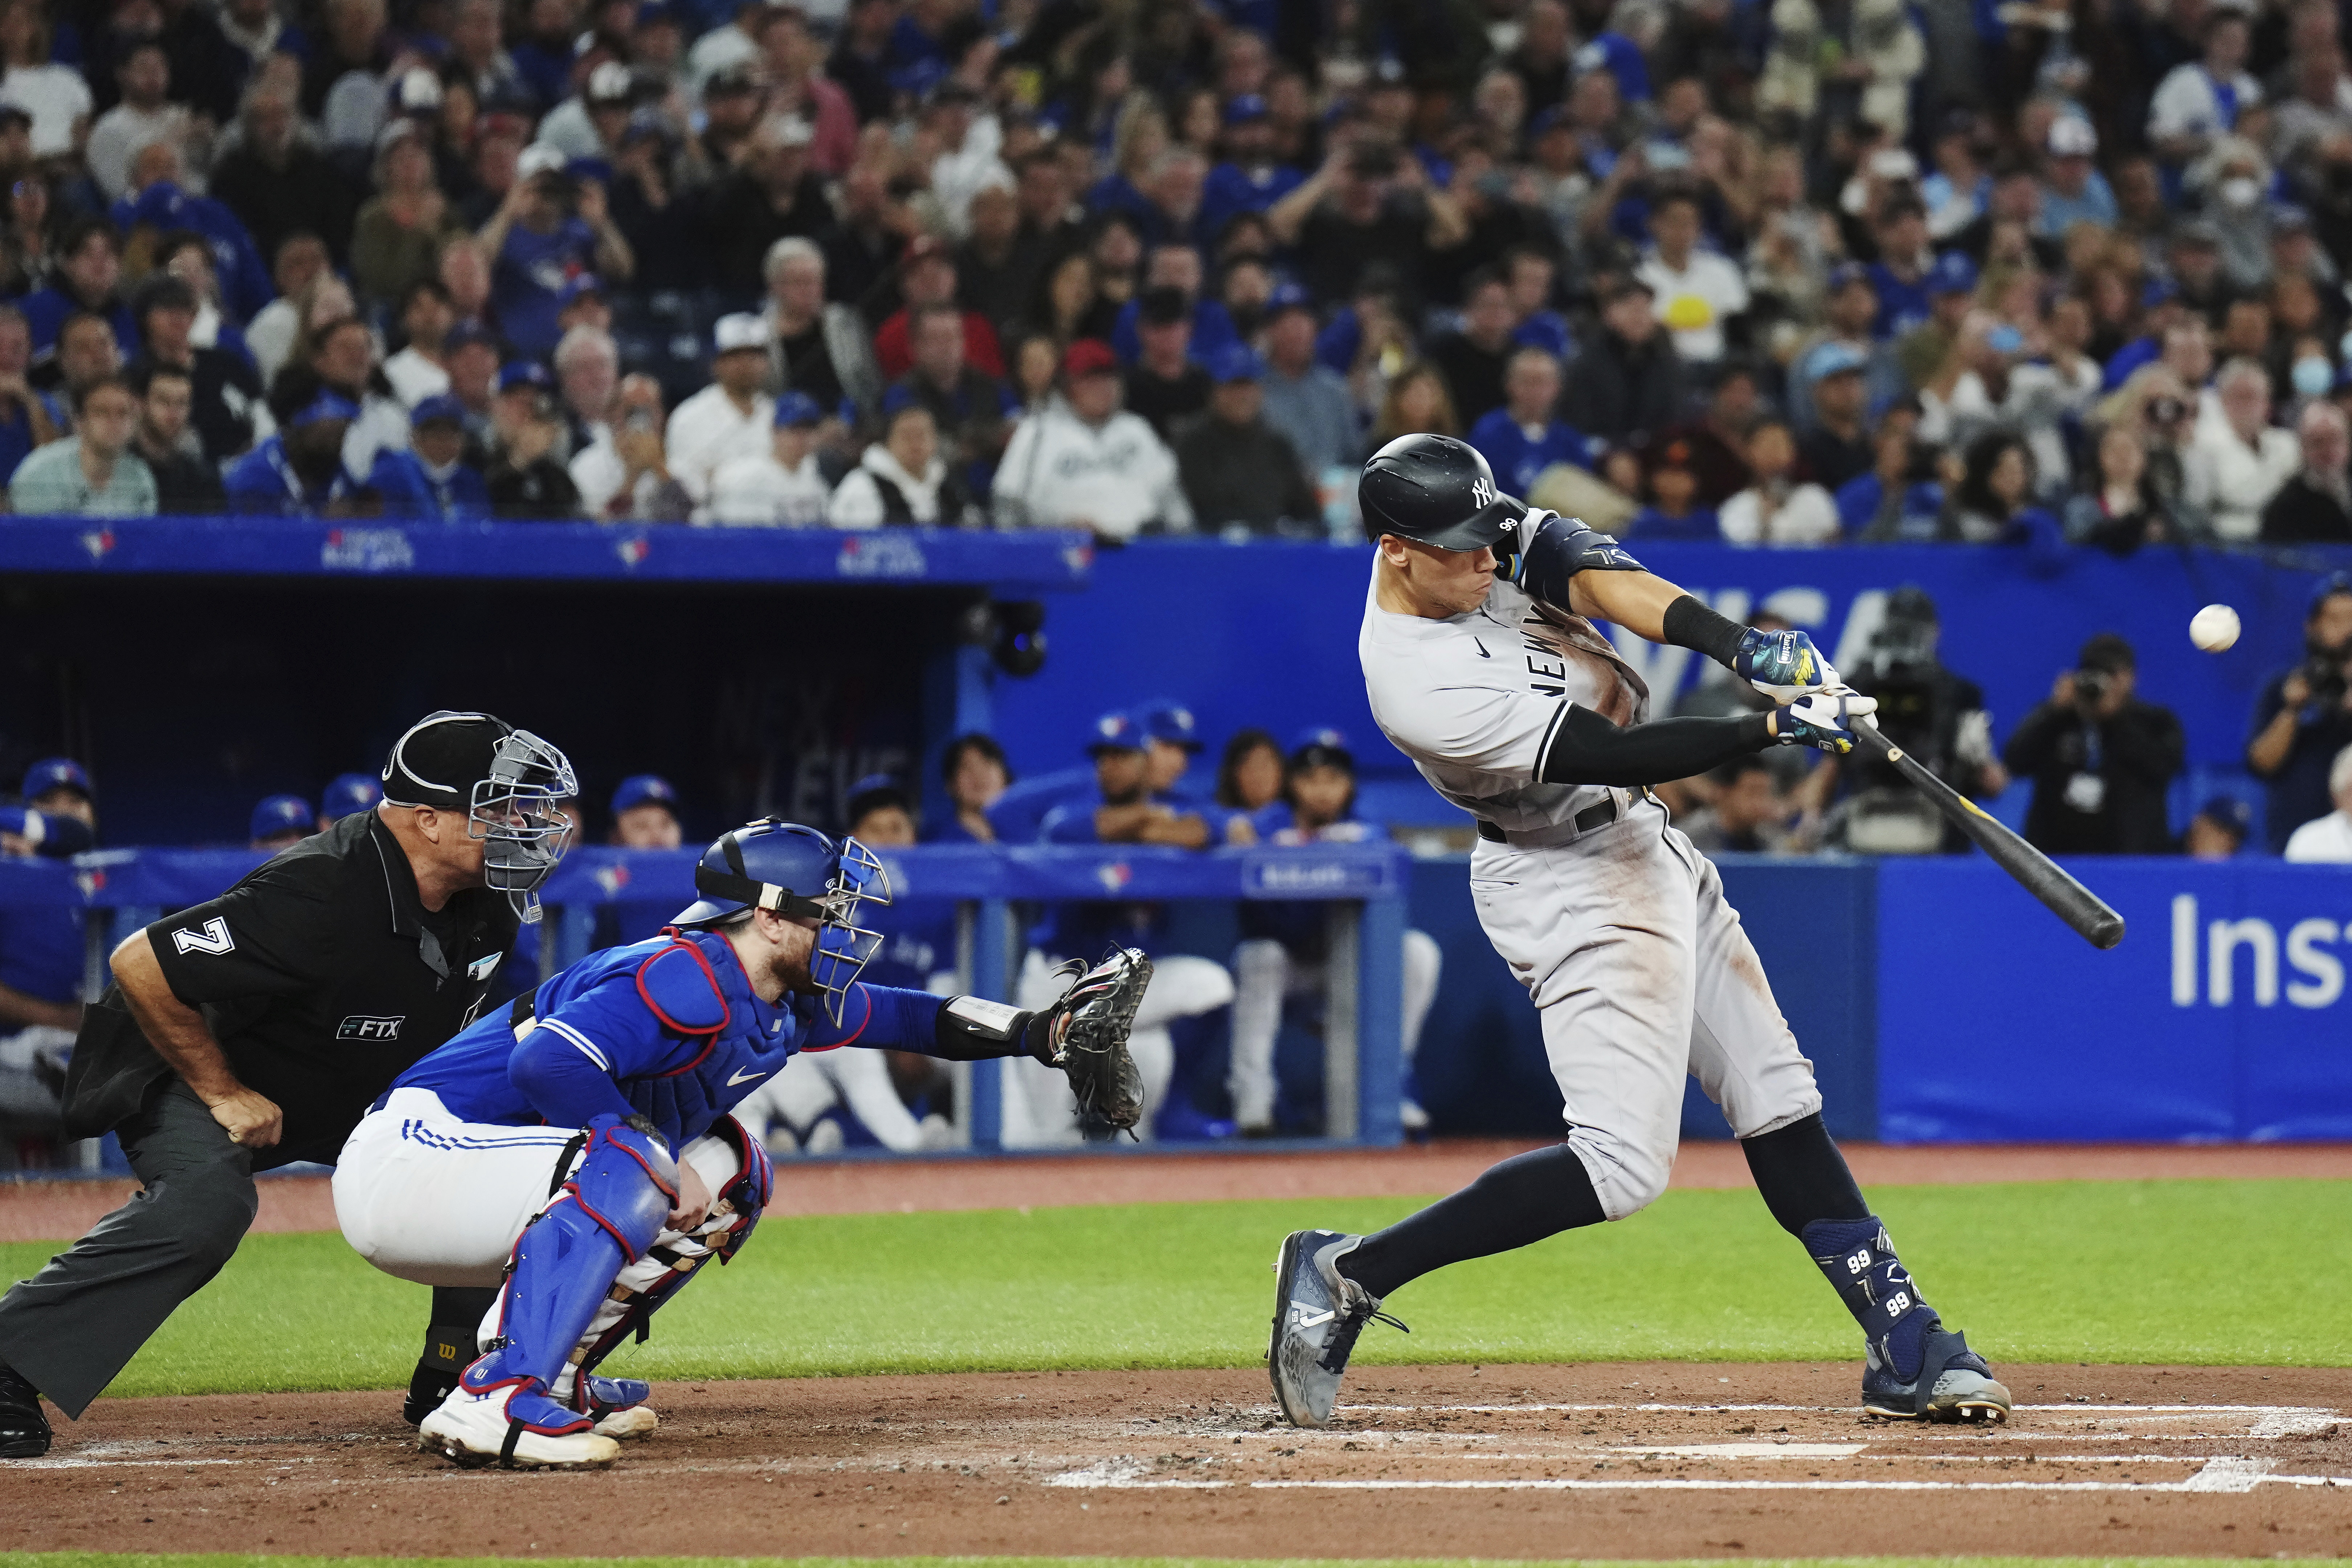 Aaron Judge Hits 61st Home Run to Tie Roger Maris' Record